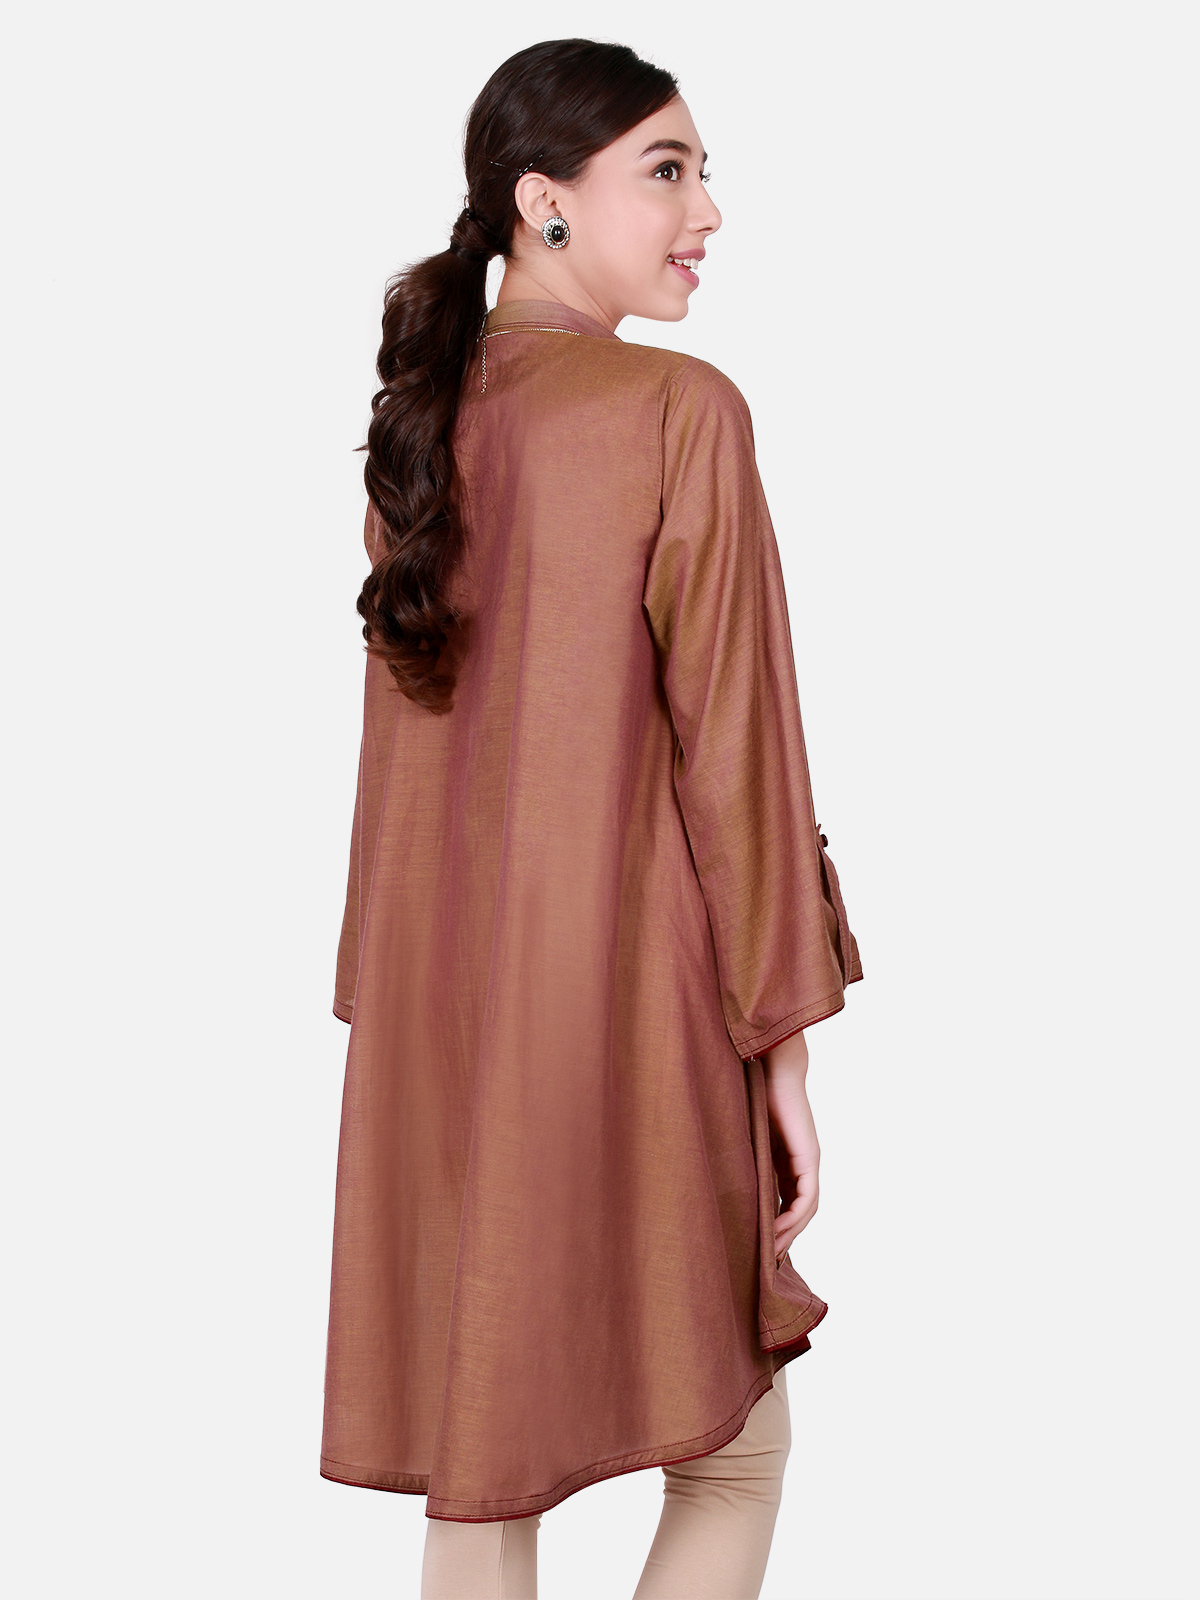 Stylish brown ready to wear shirt by Eden Robe kurti collection 2019